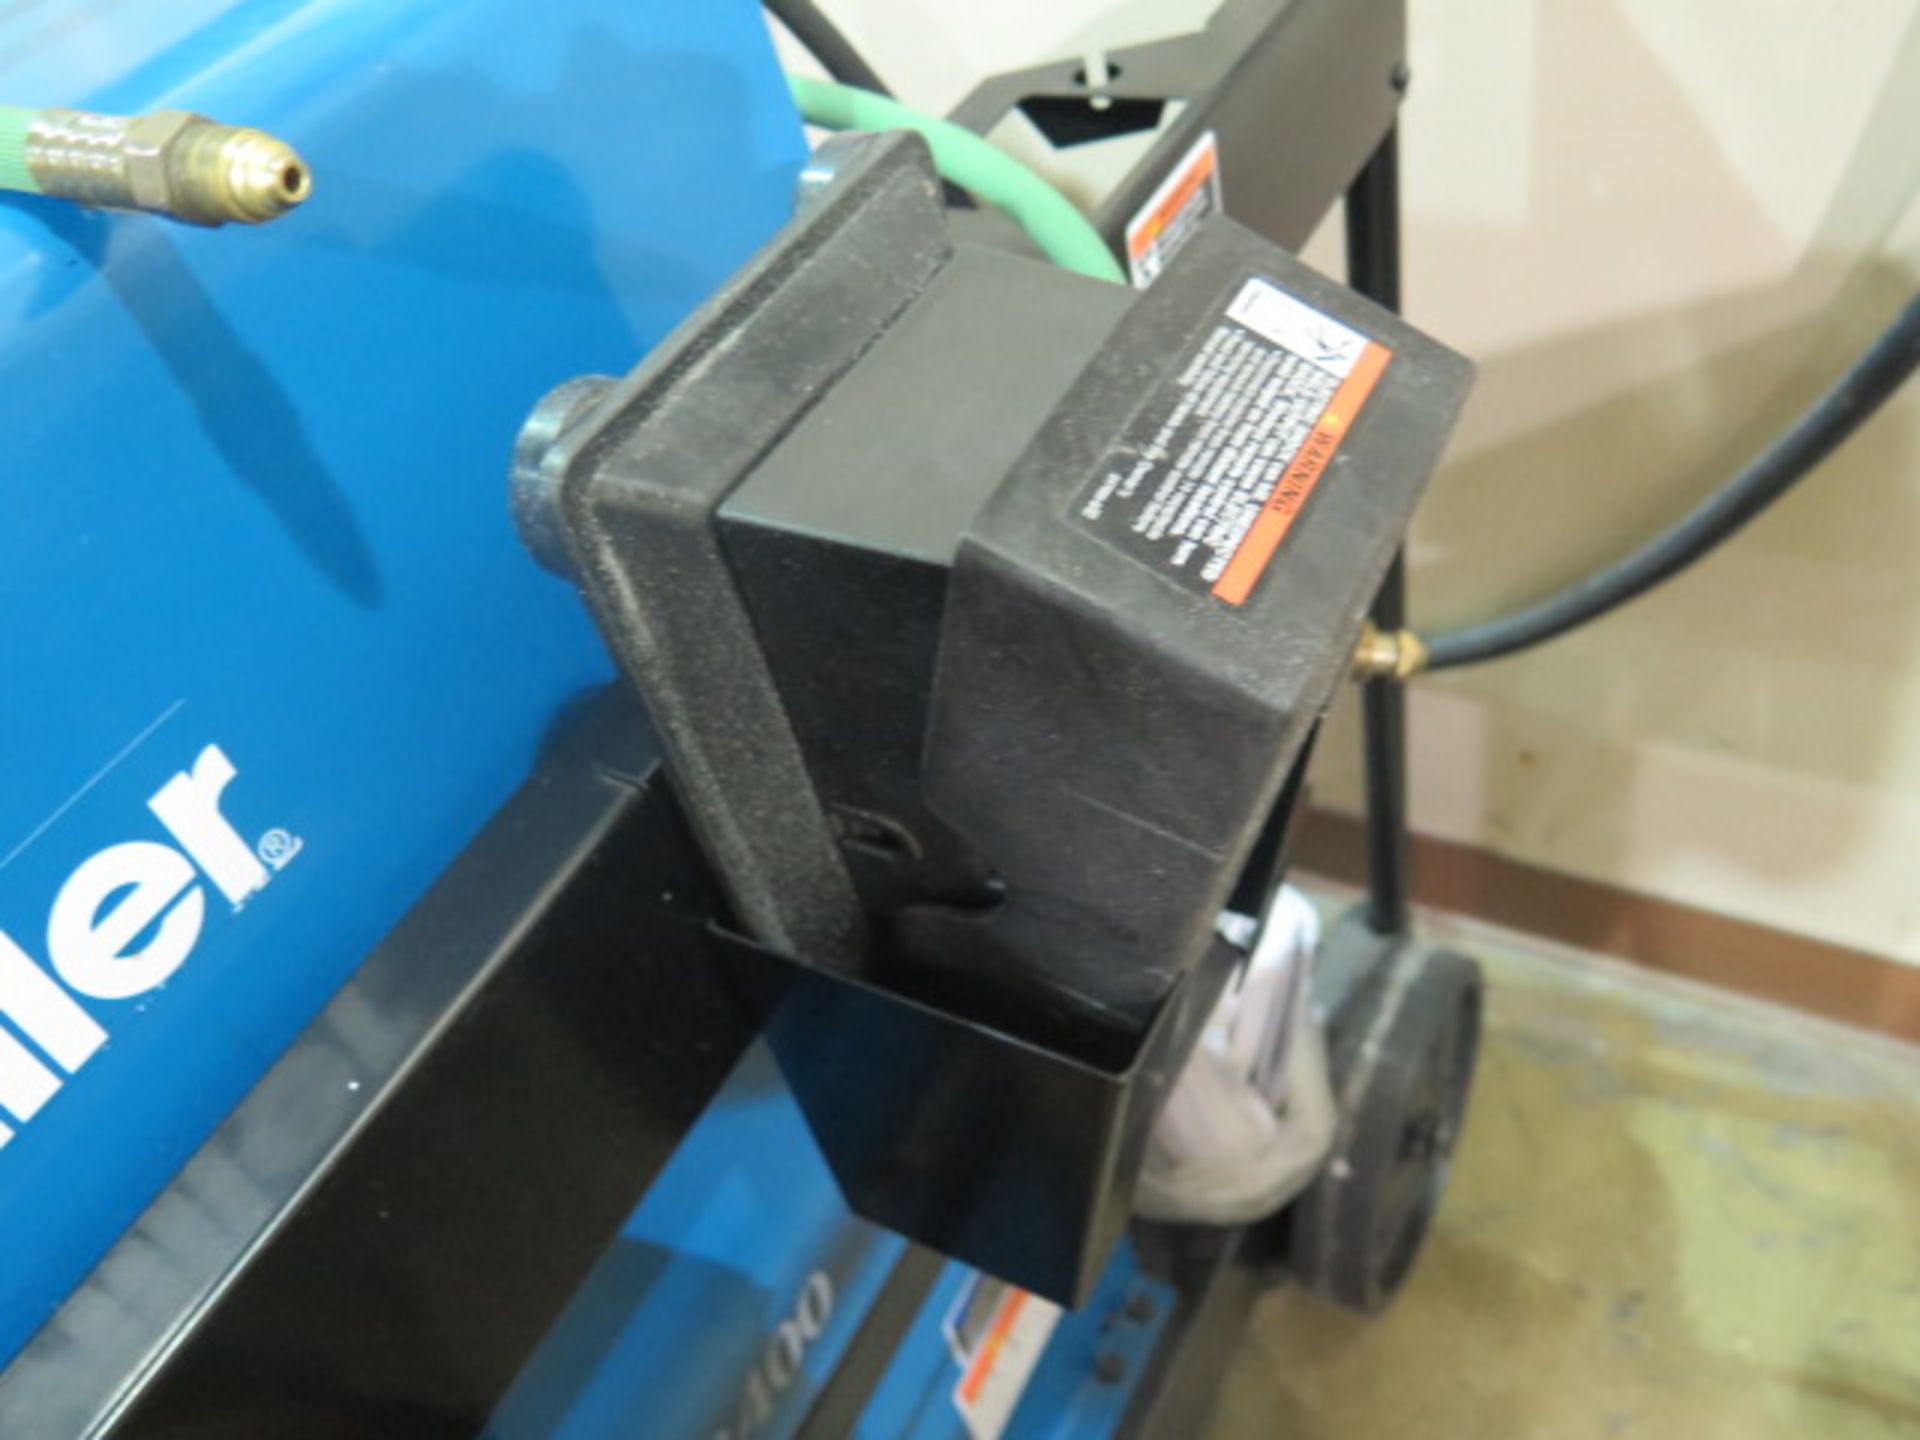 Miller Dynasty 400 Arc Welding Power Source s/n MH490776L w/ Wireless Foot Control, SOLD AS IS - Image 6 of 8